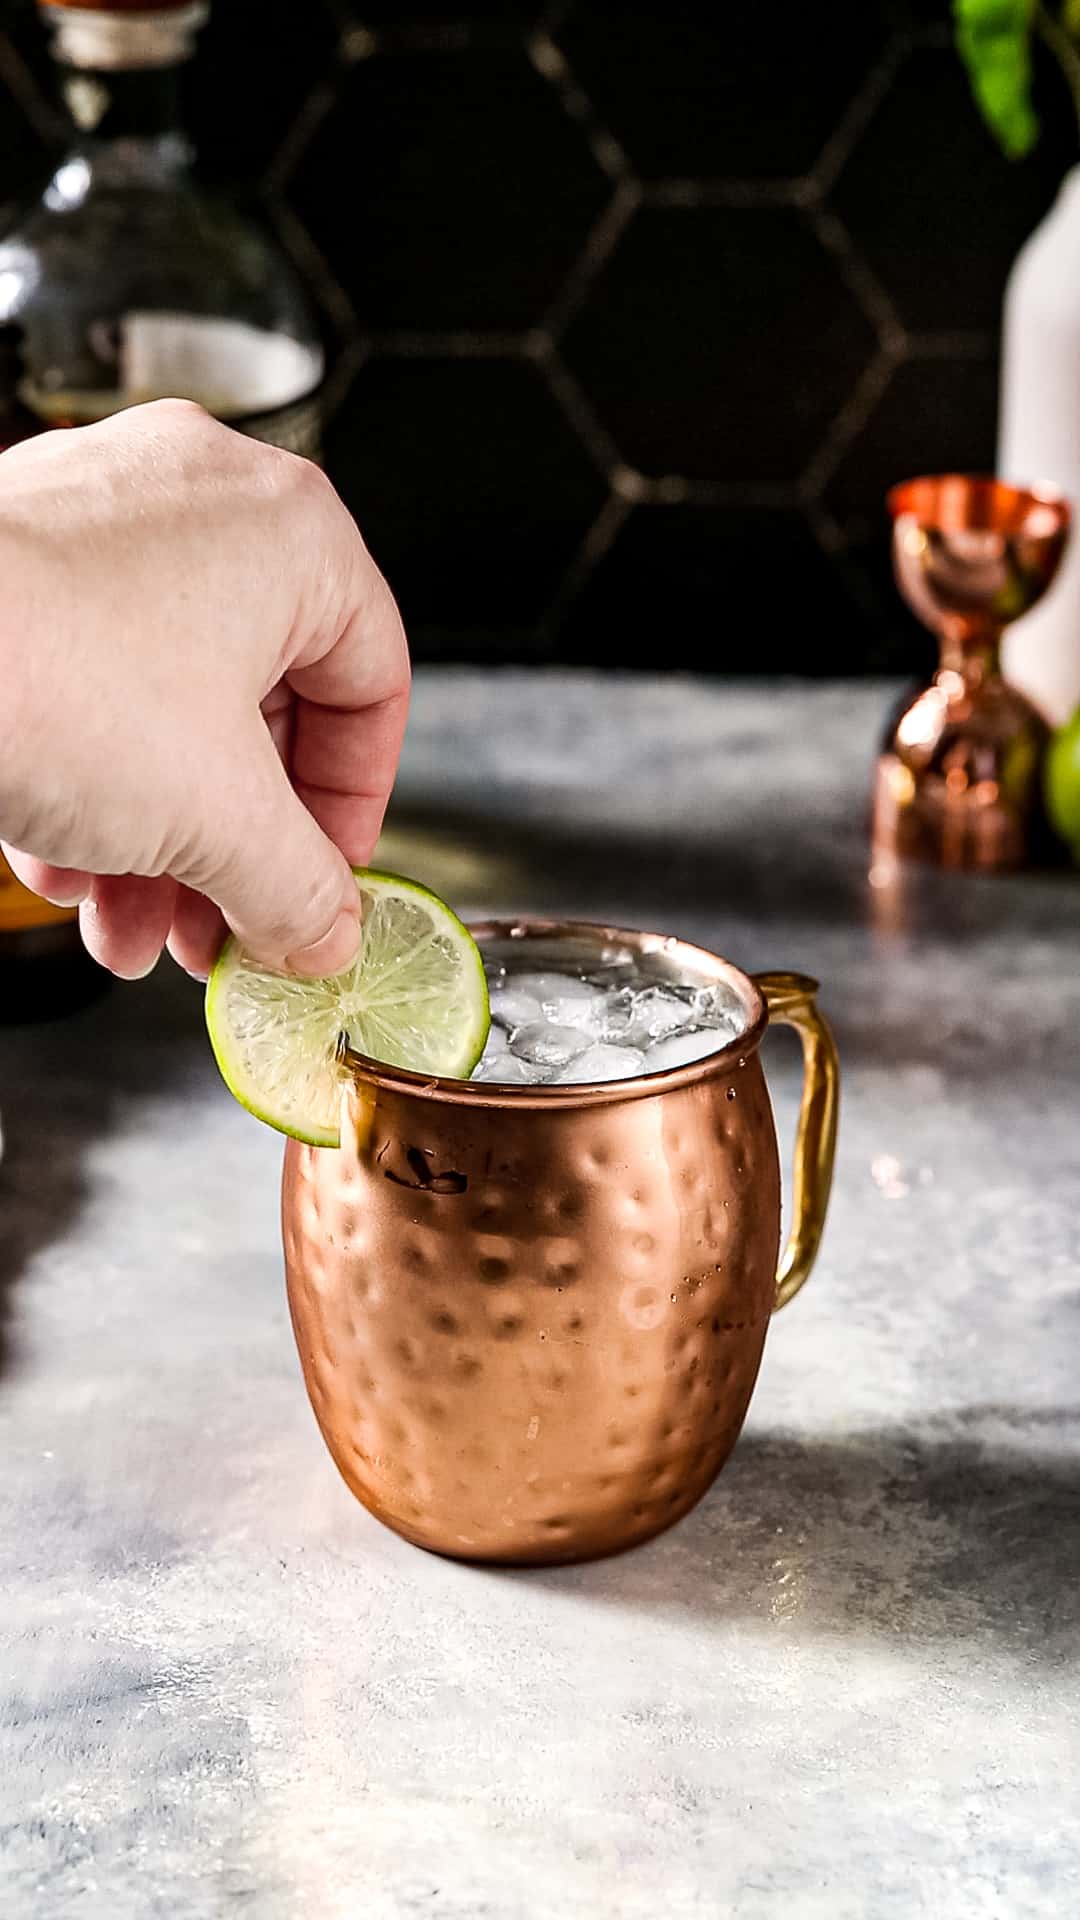 Hand adding a fresh lime wheel as a garnish to the rim of a copper mug filled with liquid and crushed ice.